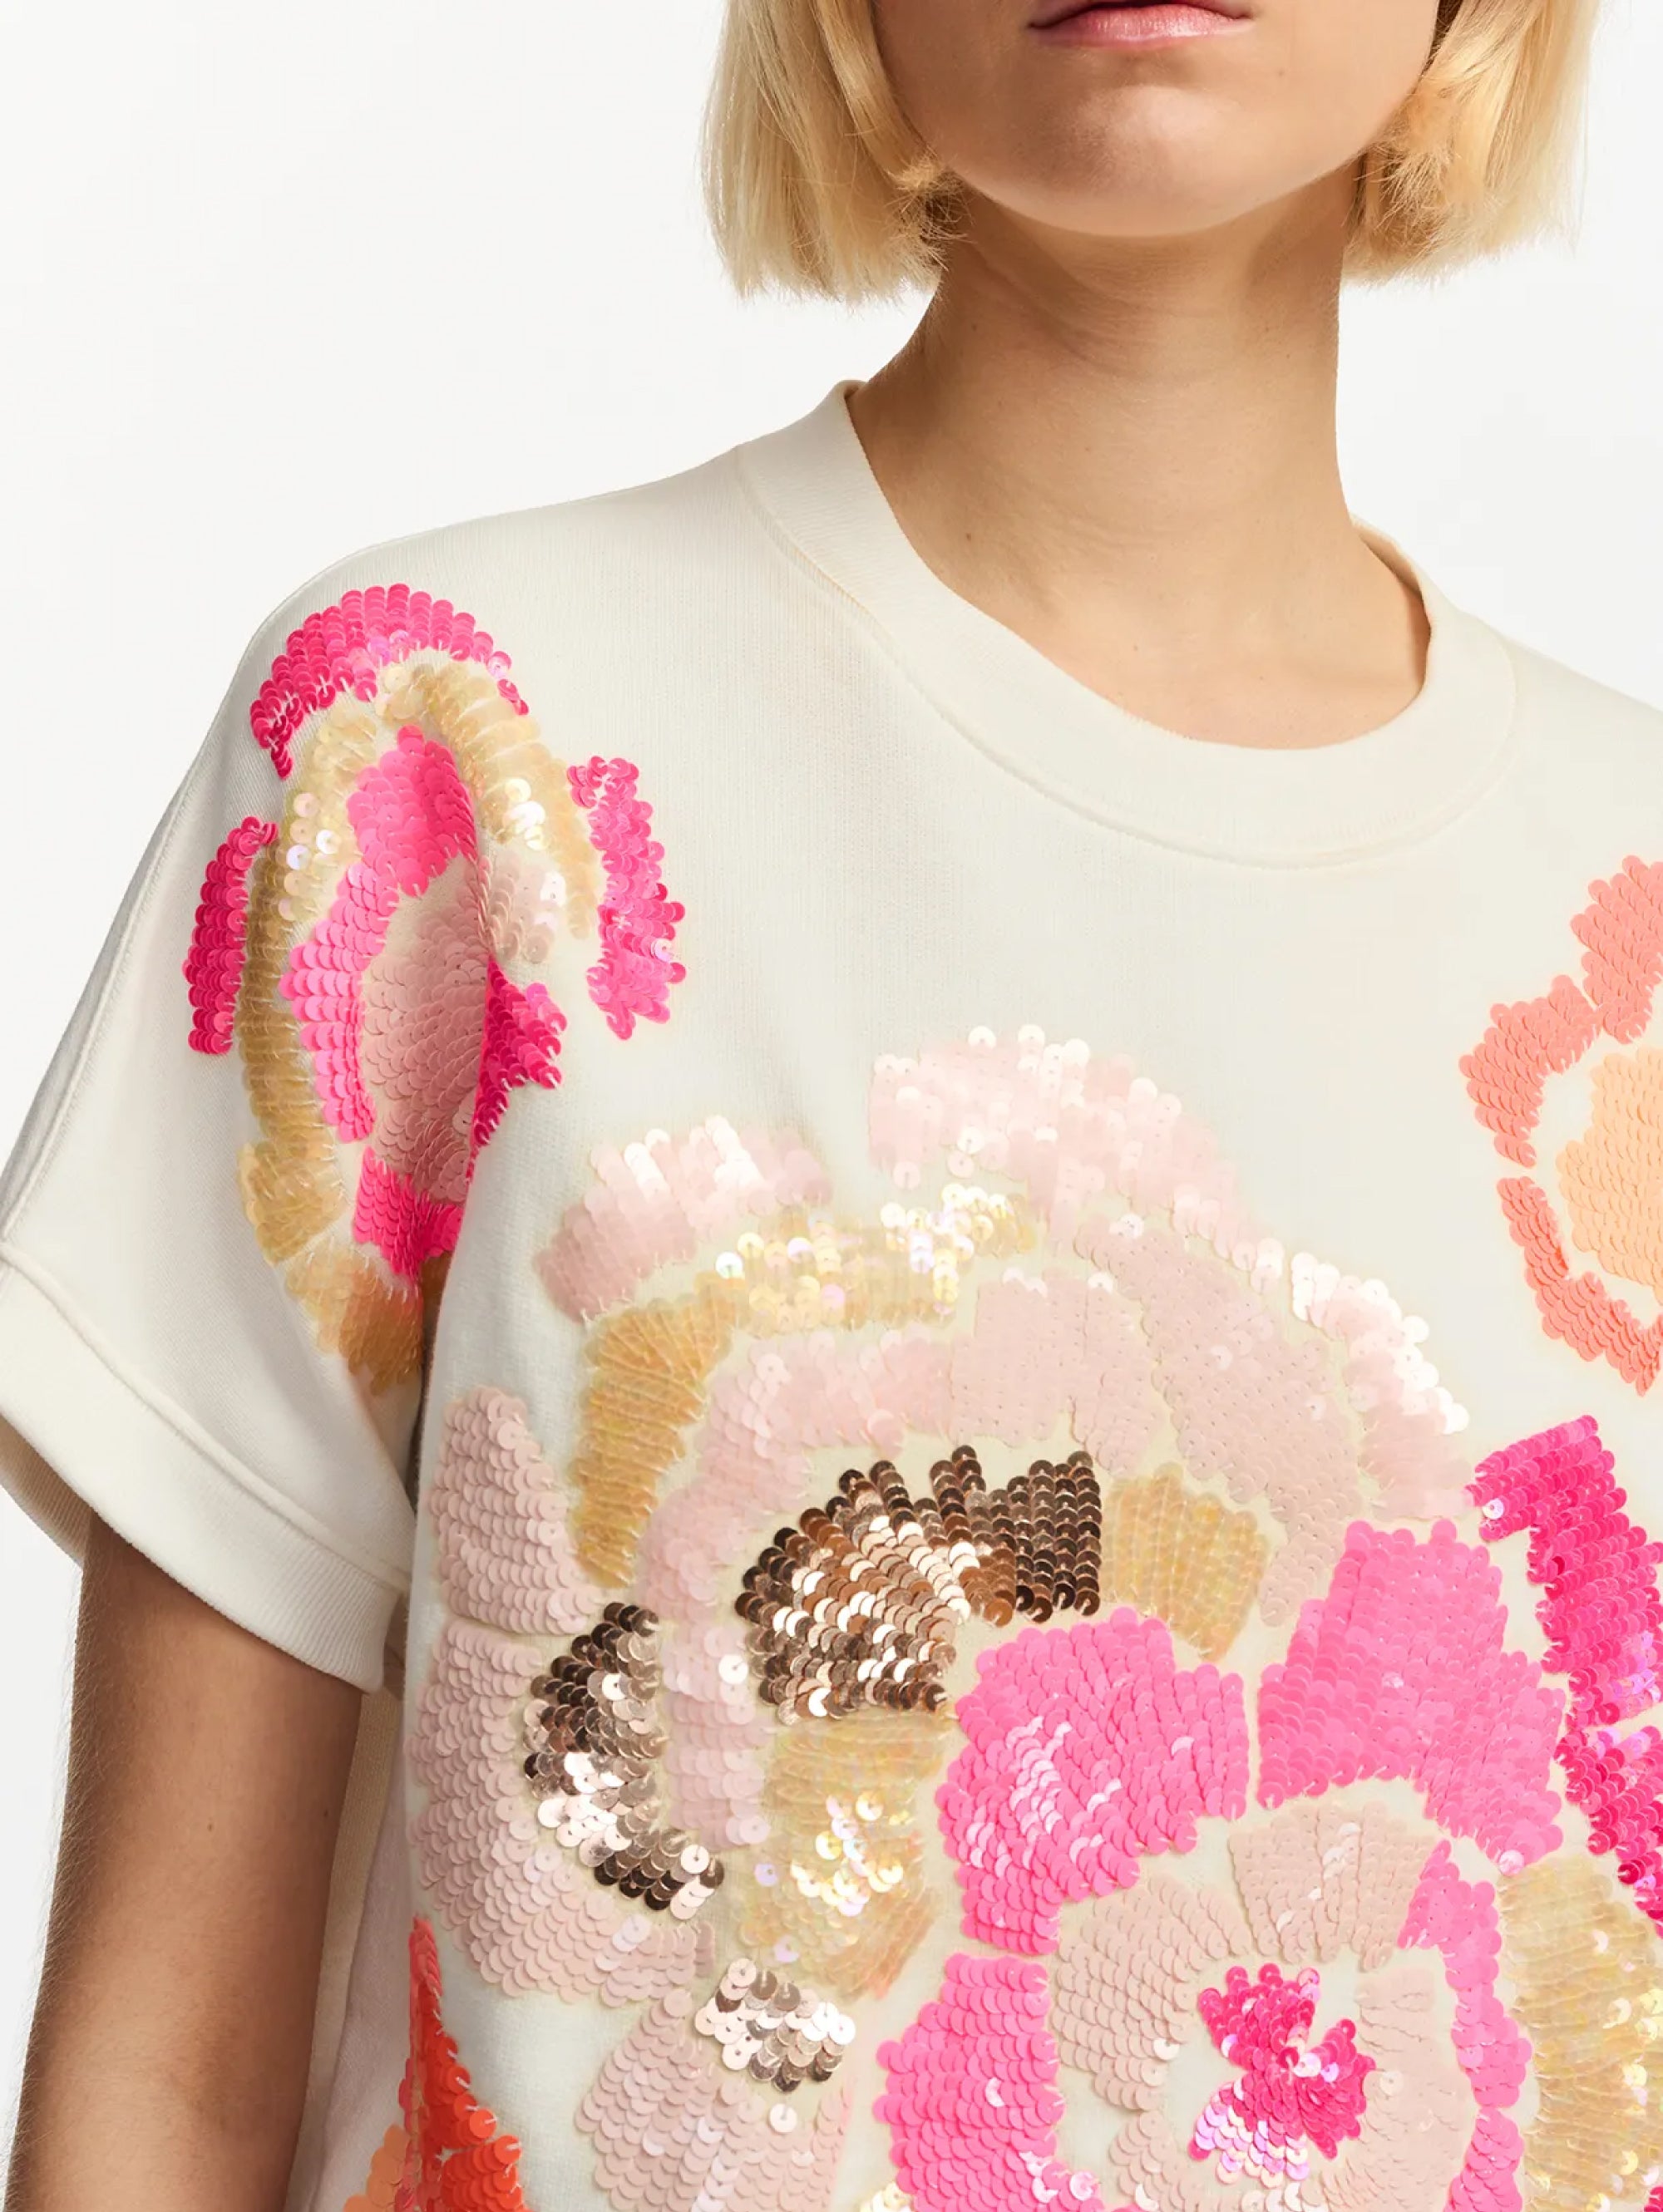 Sweatshirt with Flowers Embroidered with White Sequins